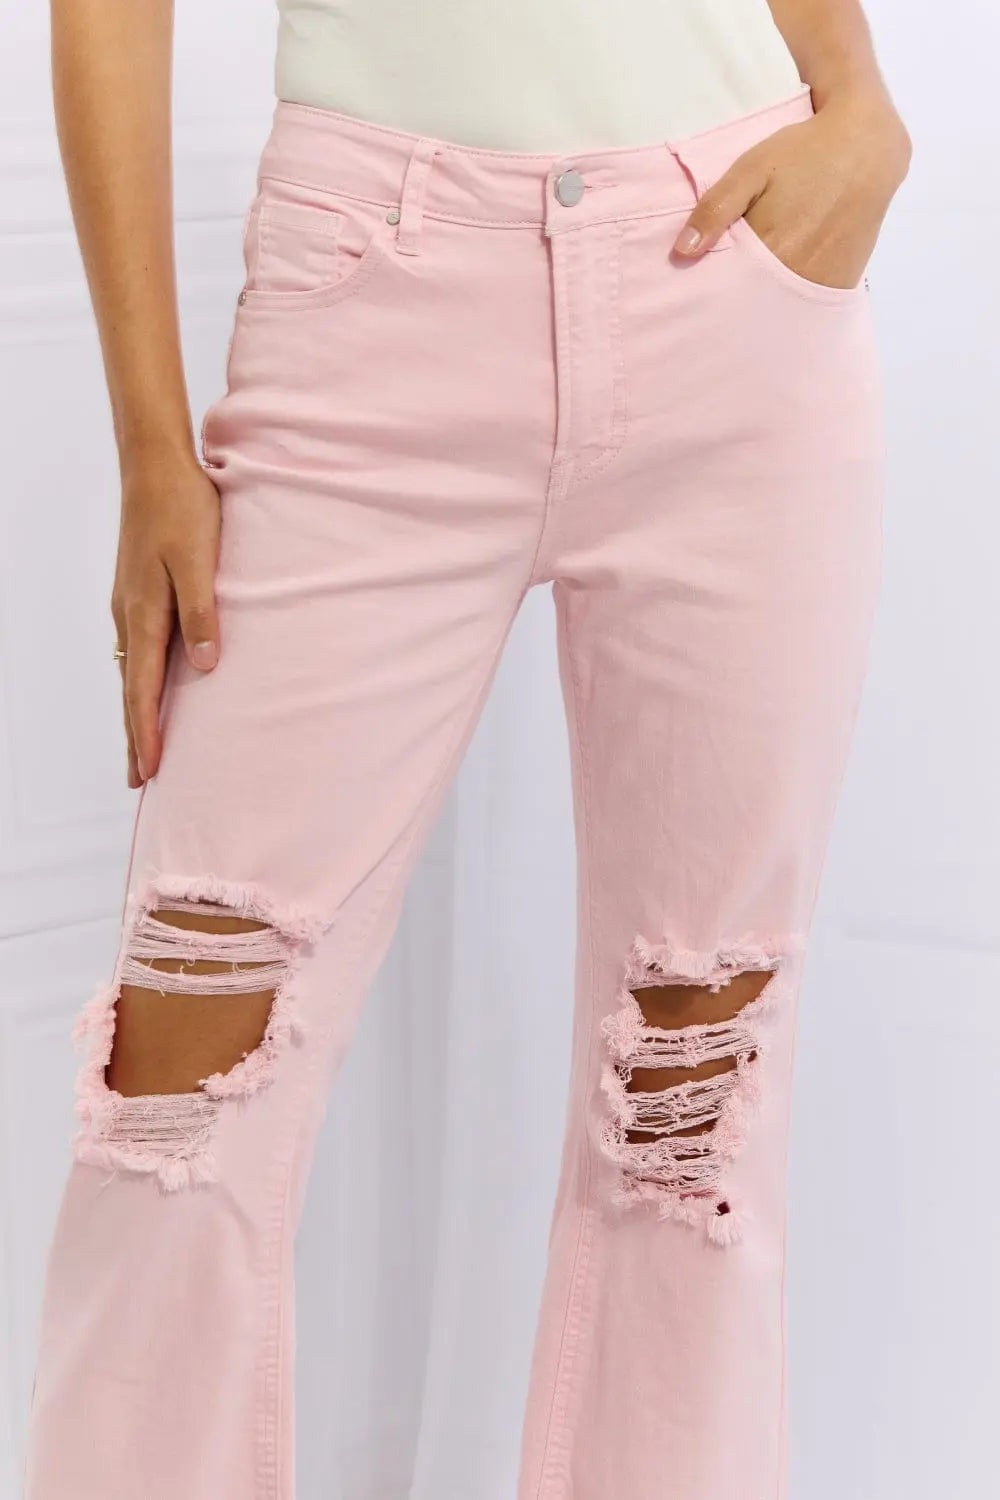 Risen Jeans | Distressed Ankle Flare Jeans | Trendy Jeans | 